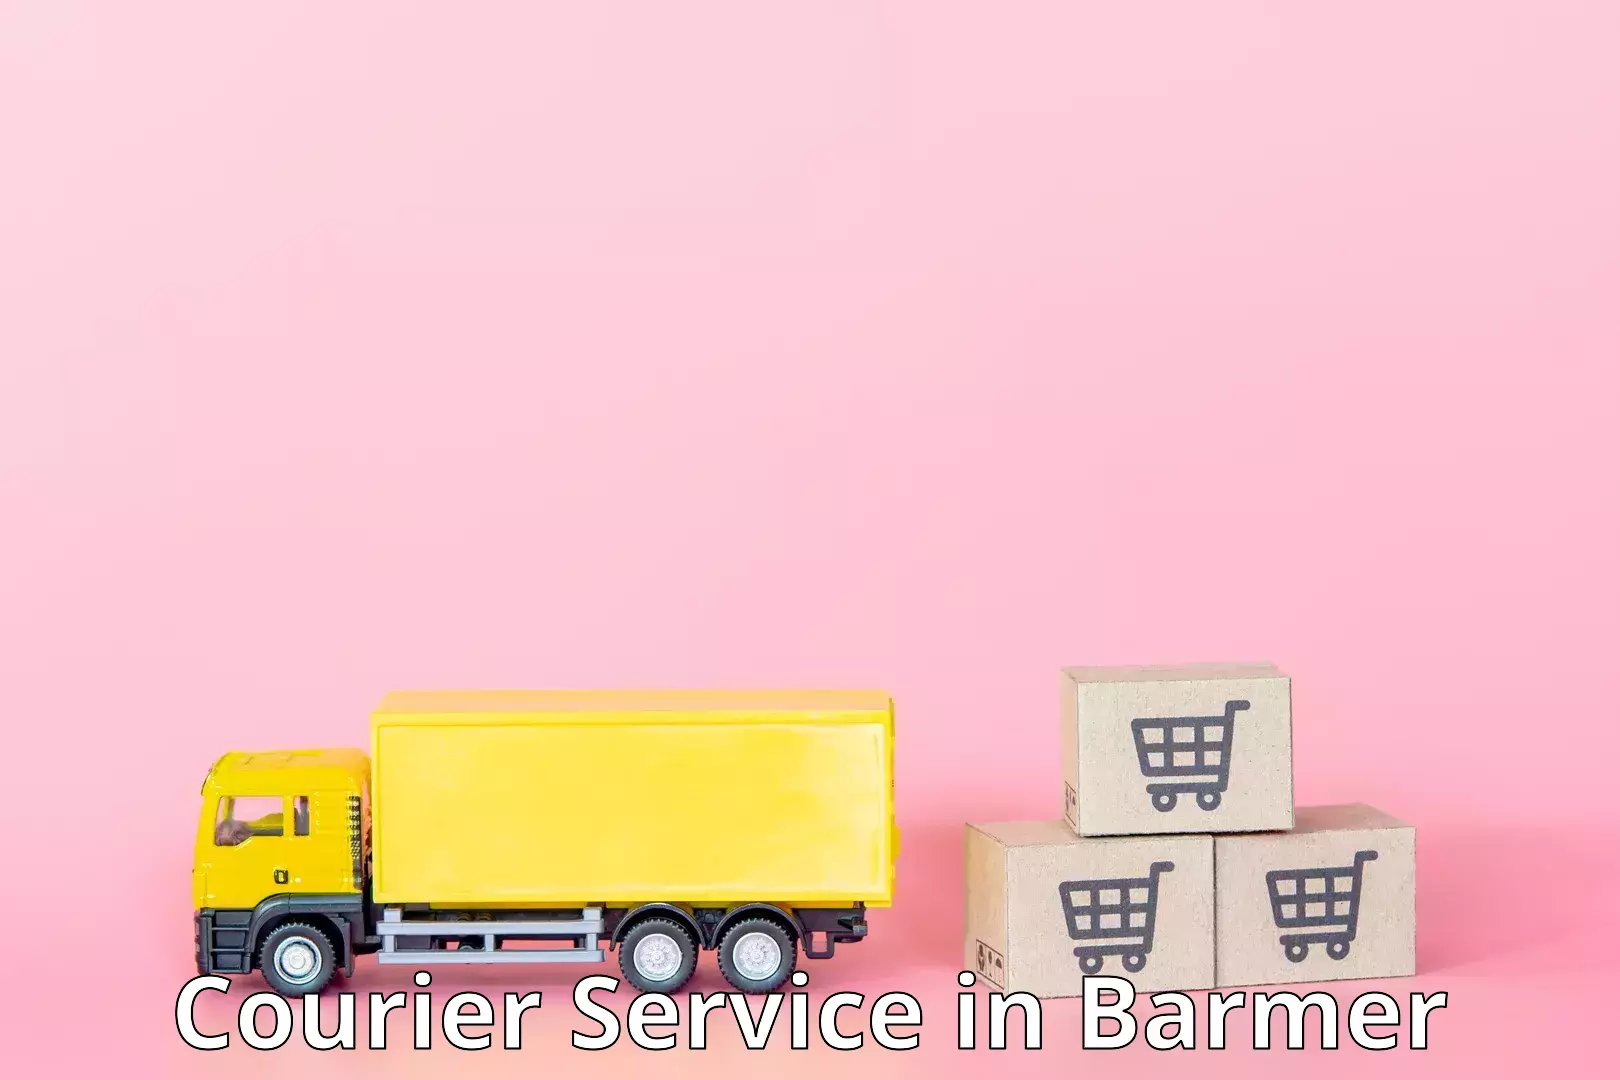 Modern delivery technologies in Barmer